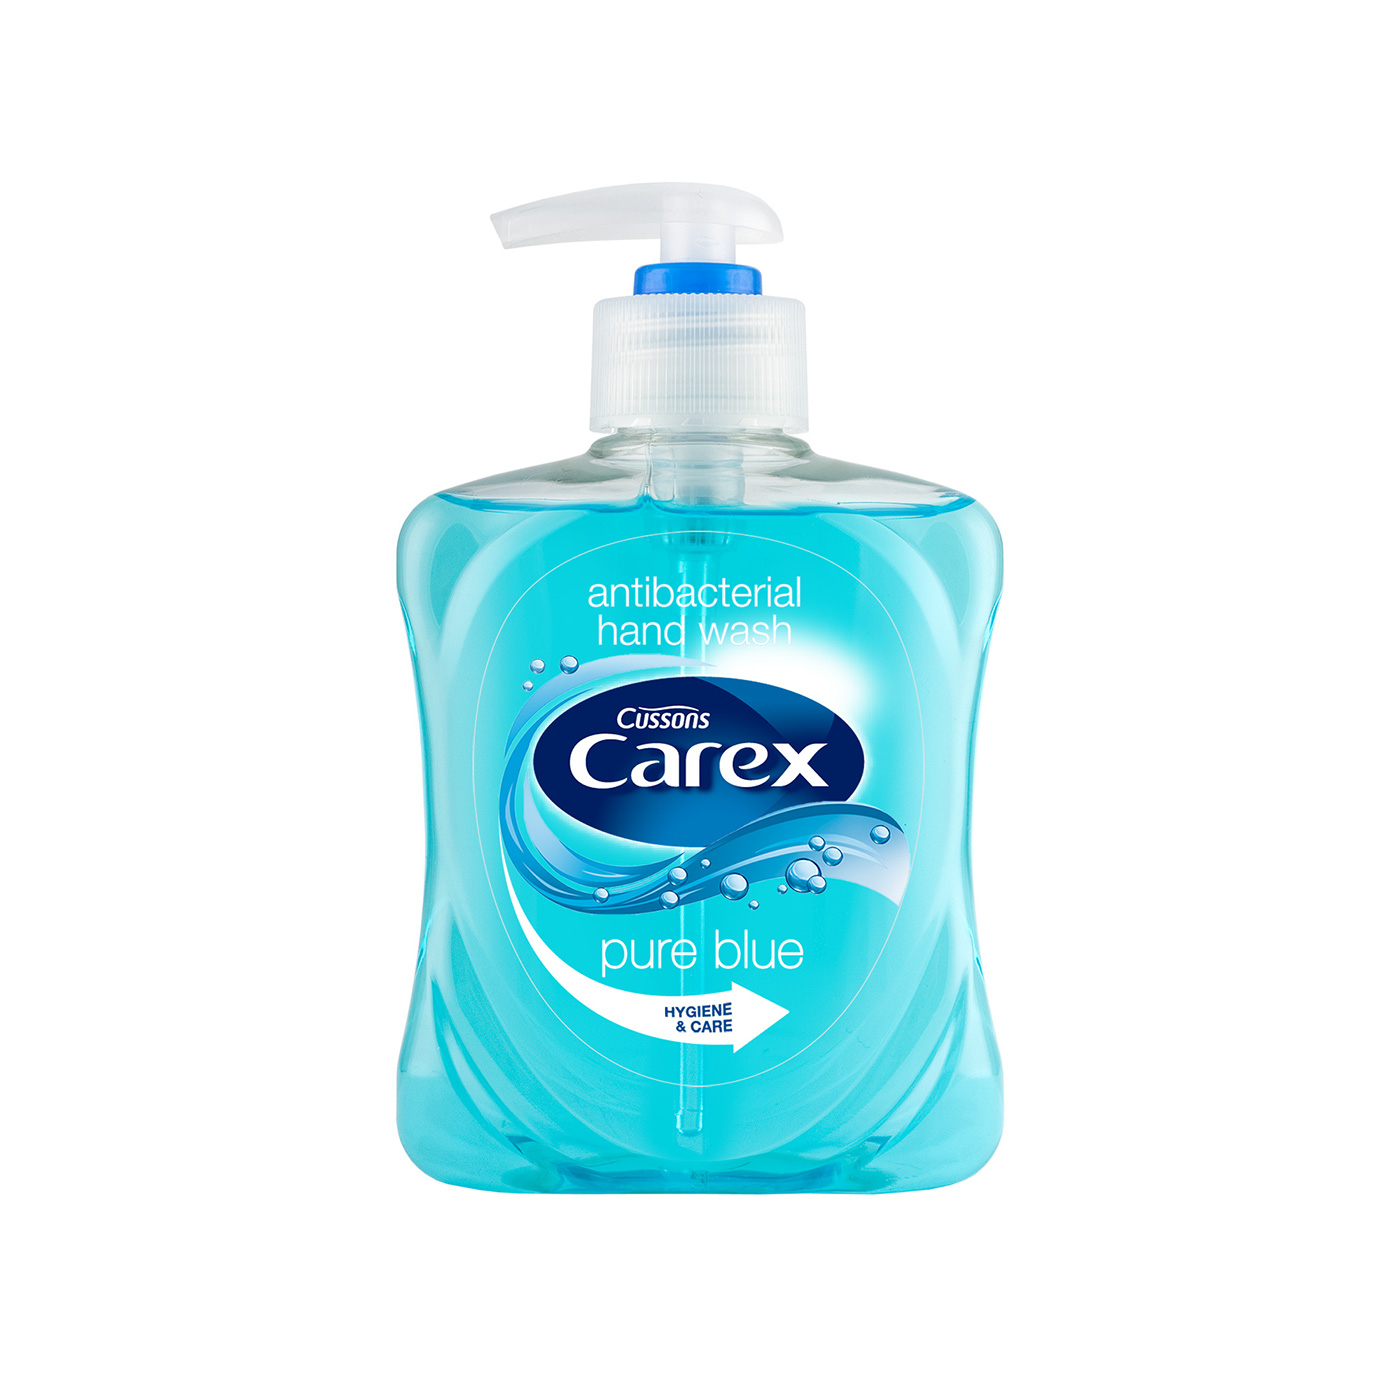 Packshot soap antibacterial Carex hand wash PZ Cussons clean product Photography  scriba